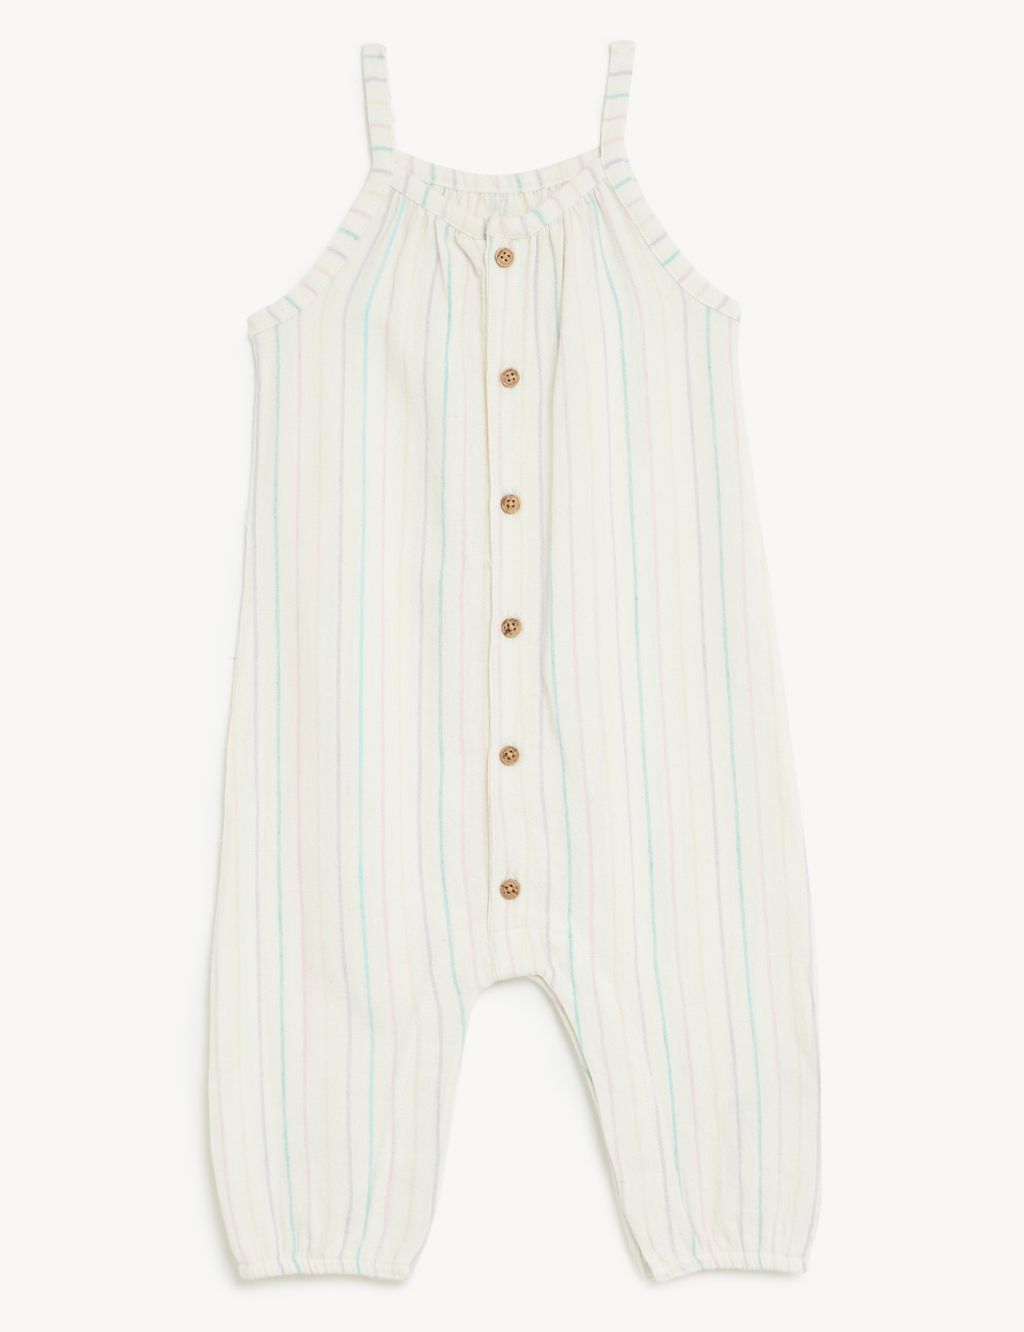 2pc Cotton Rich Striped Romper Outfit (0-3 Yrs) image 3